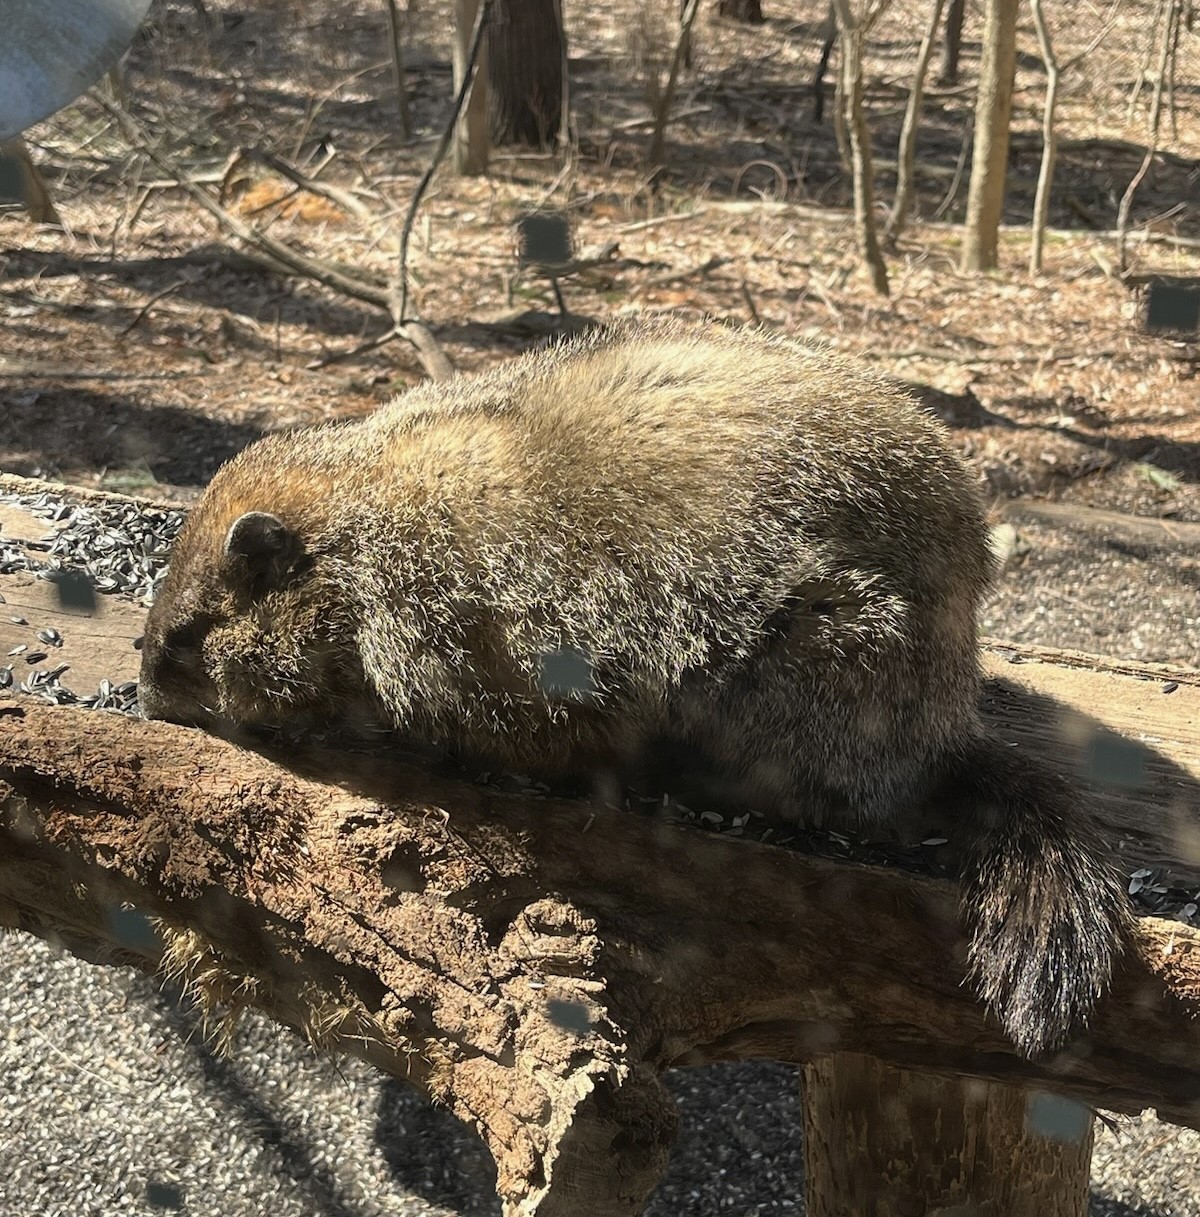 Good morning, Woodchuck! Nice to see you again. 